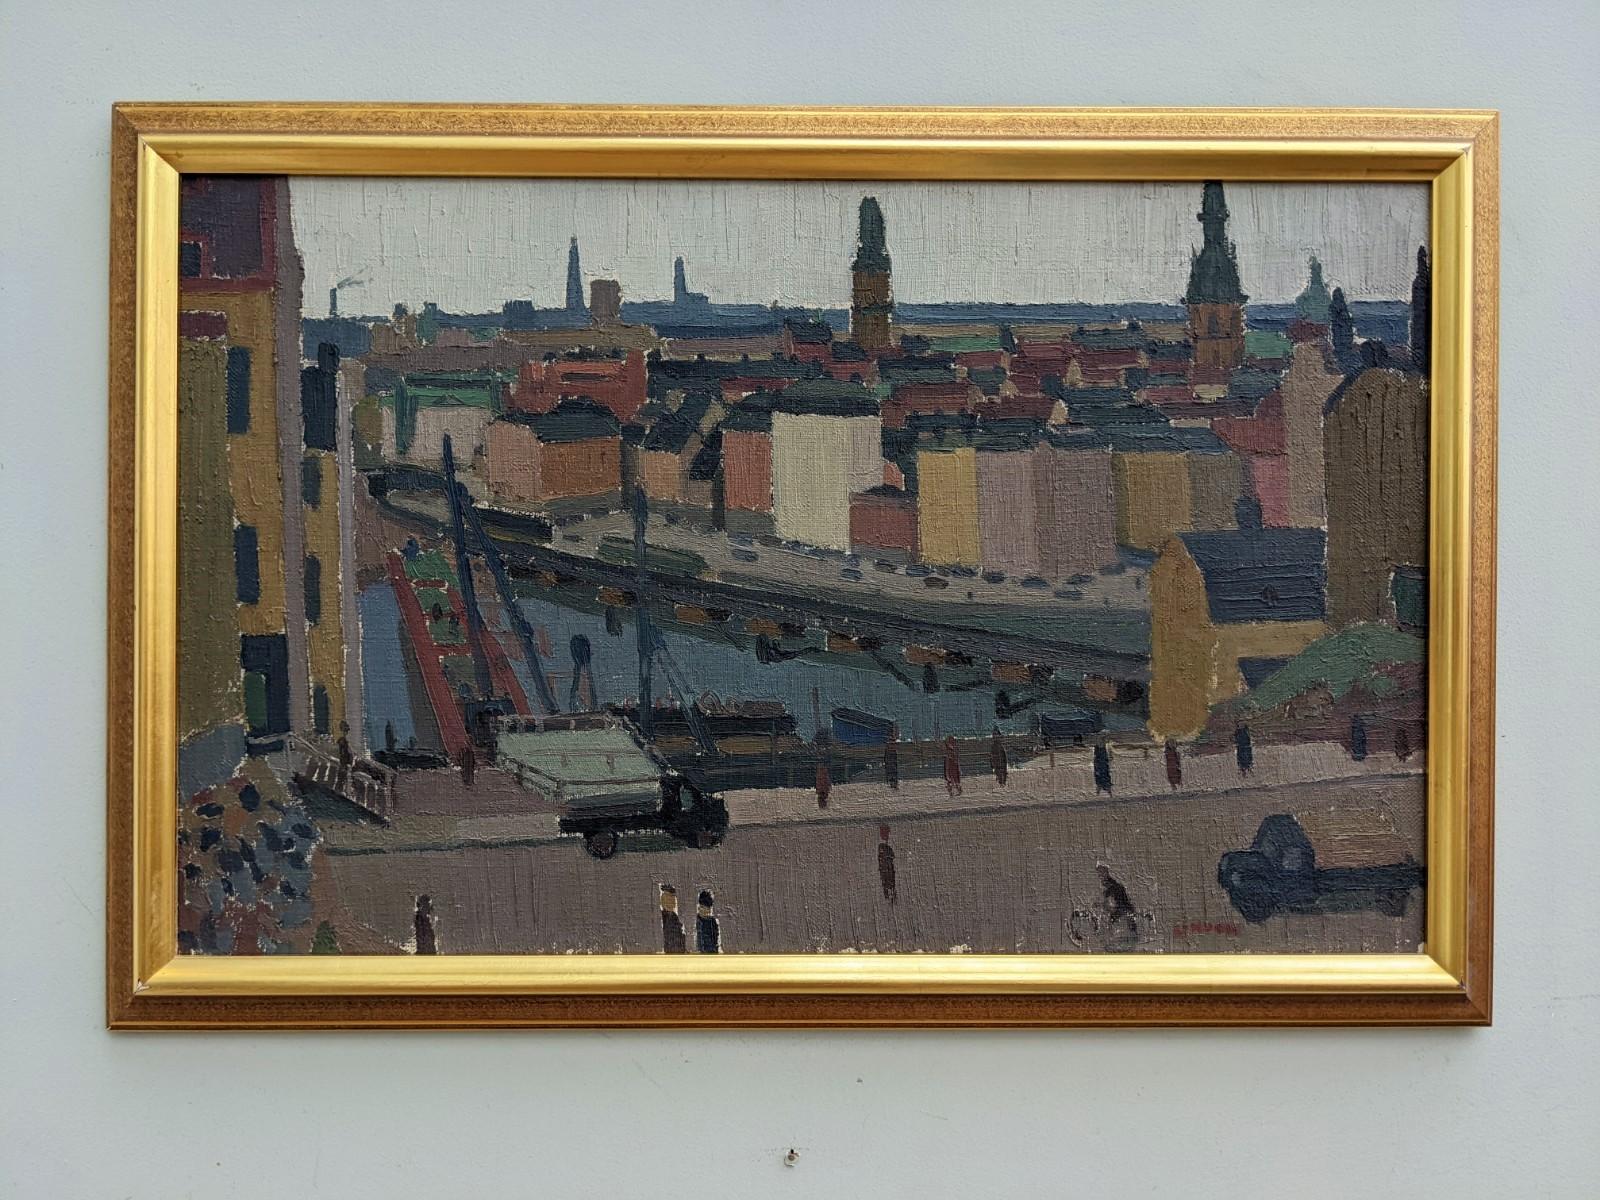 Unknown Landscape Painting - Mid-Century Modern Swedish "City View" Vintage Cityscape Oil Painting, Stockholm